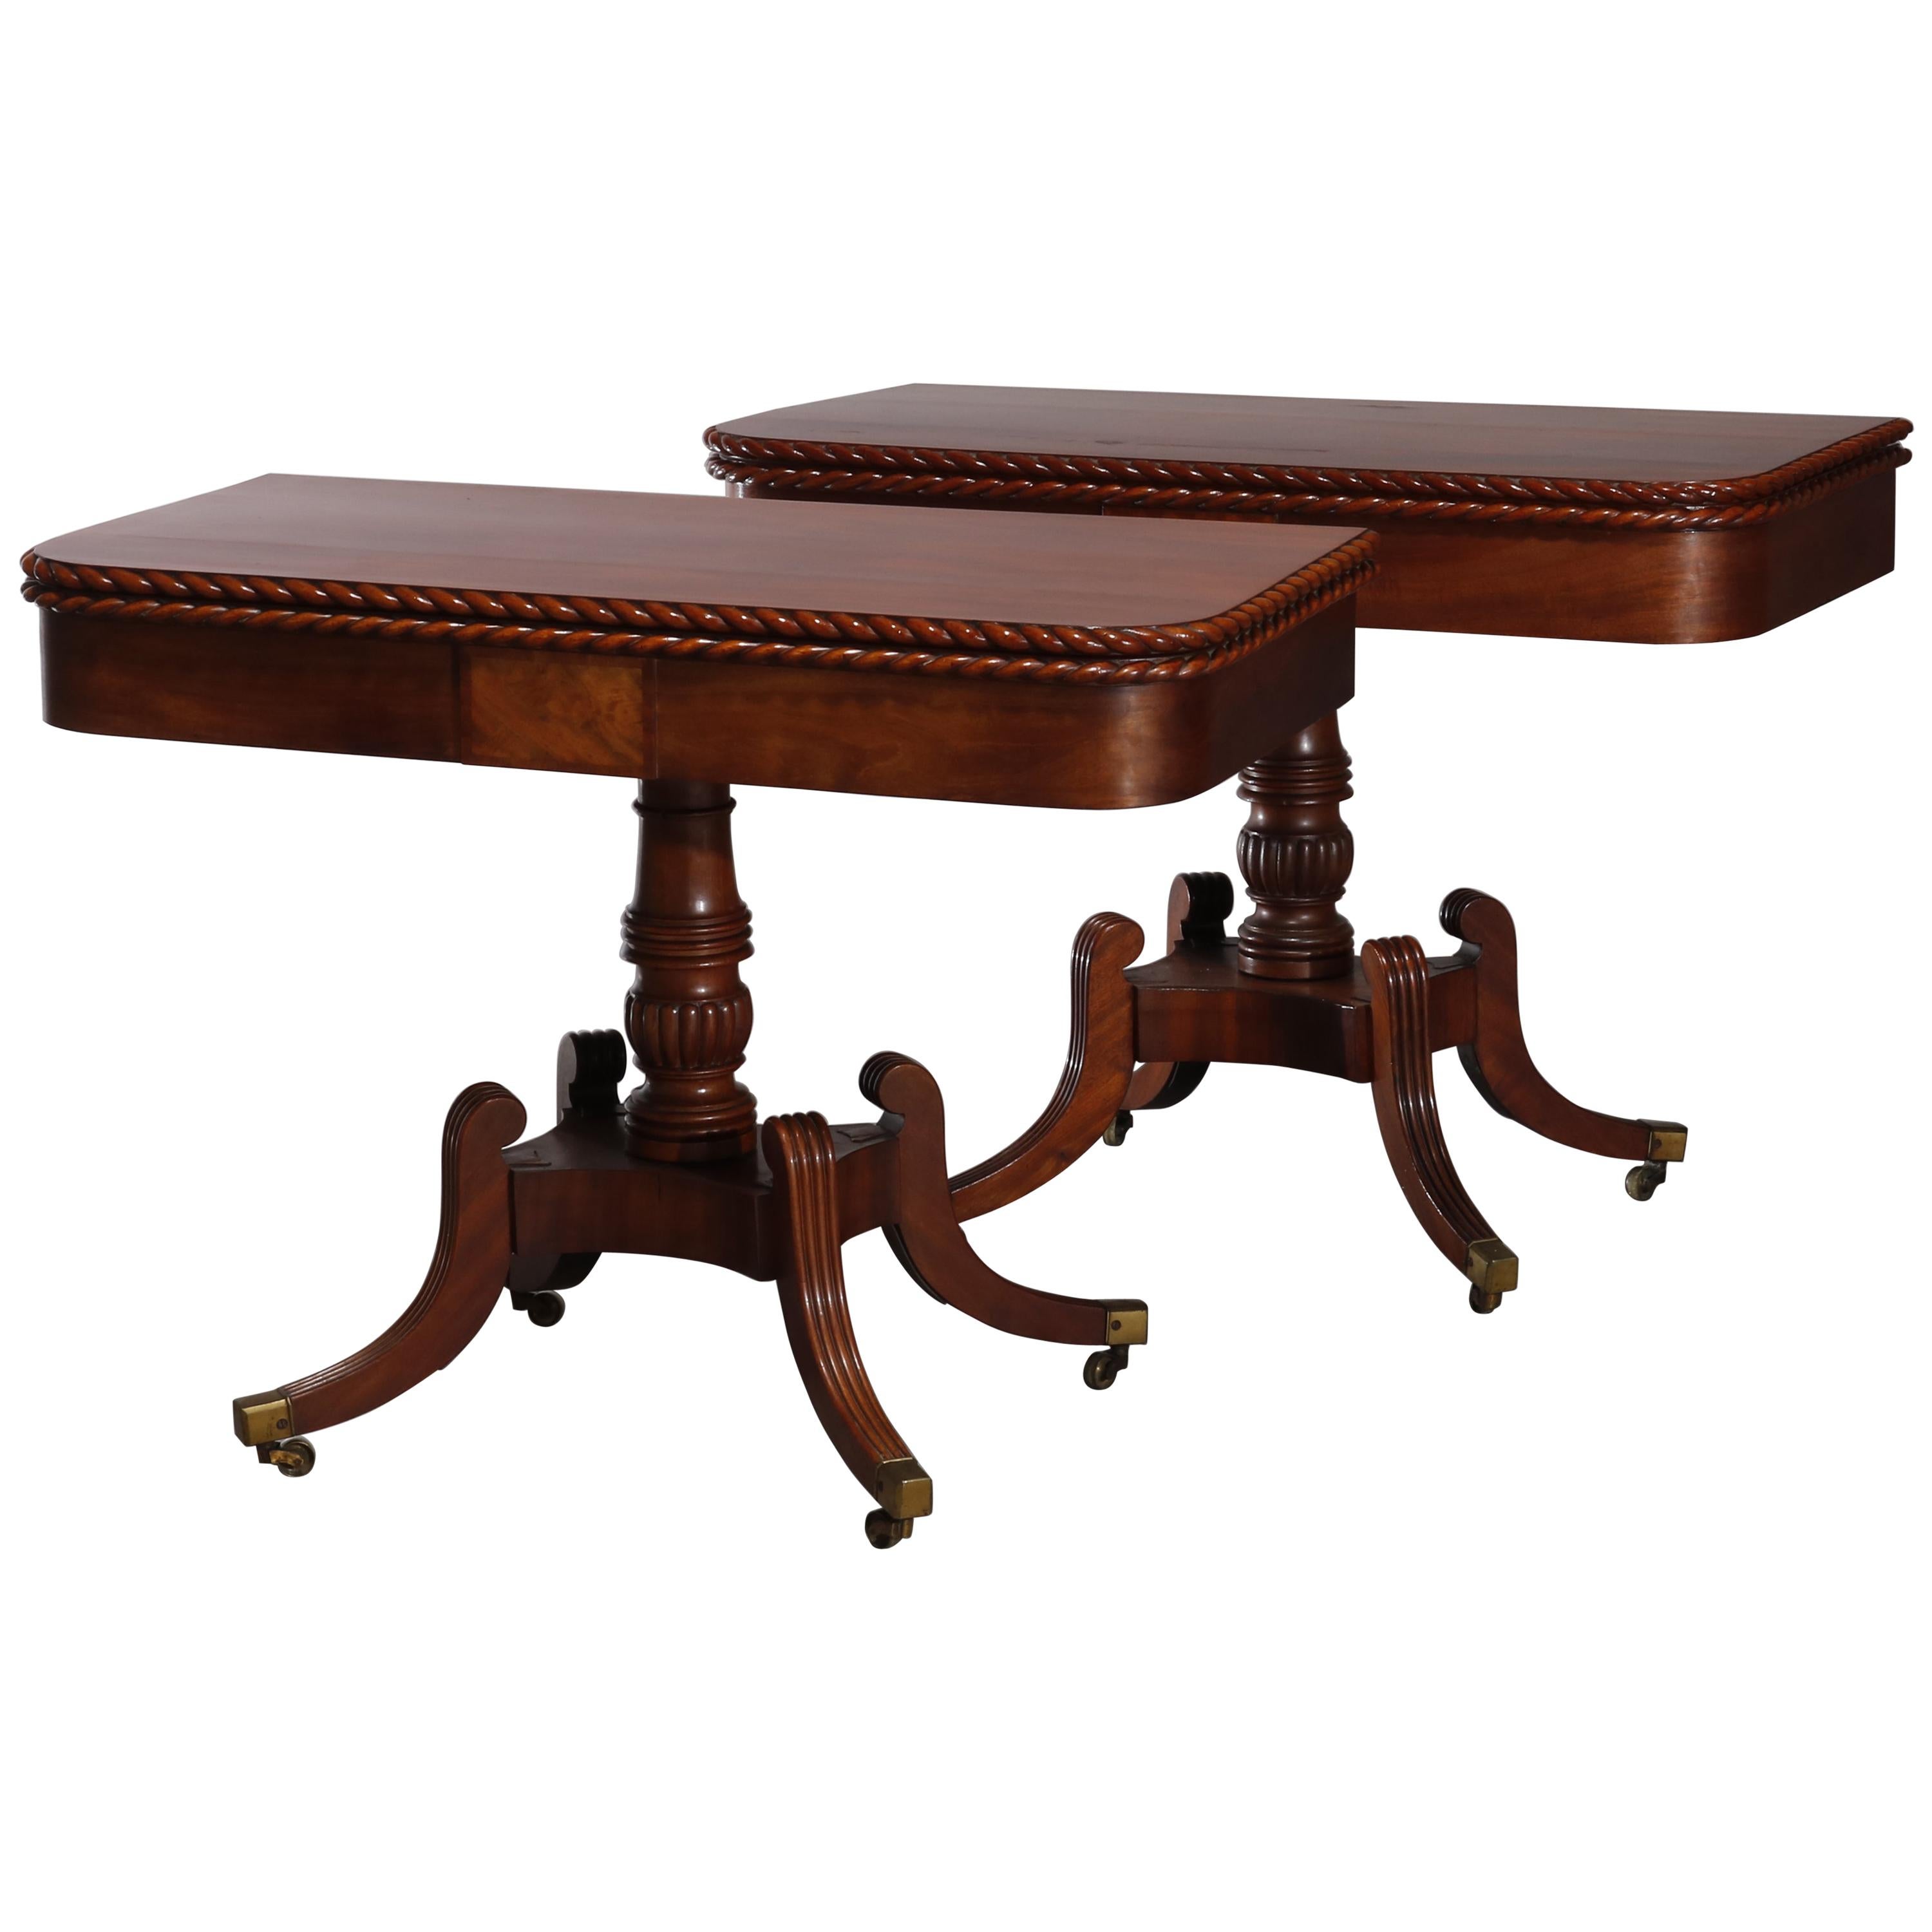 Pair of Federal Flamed Mahogany Game Tables W. Gadrooned Edge, circa 1820